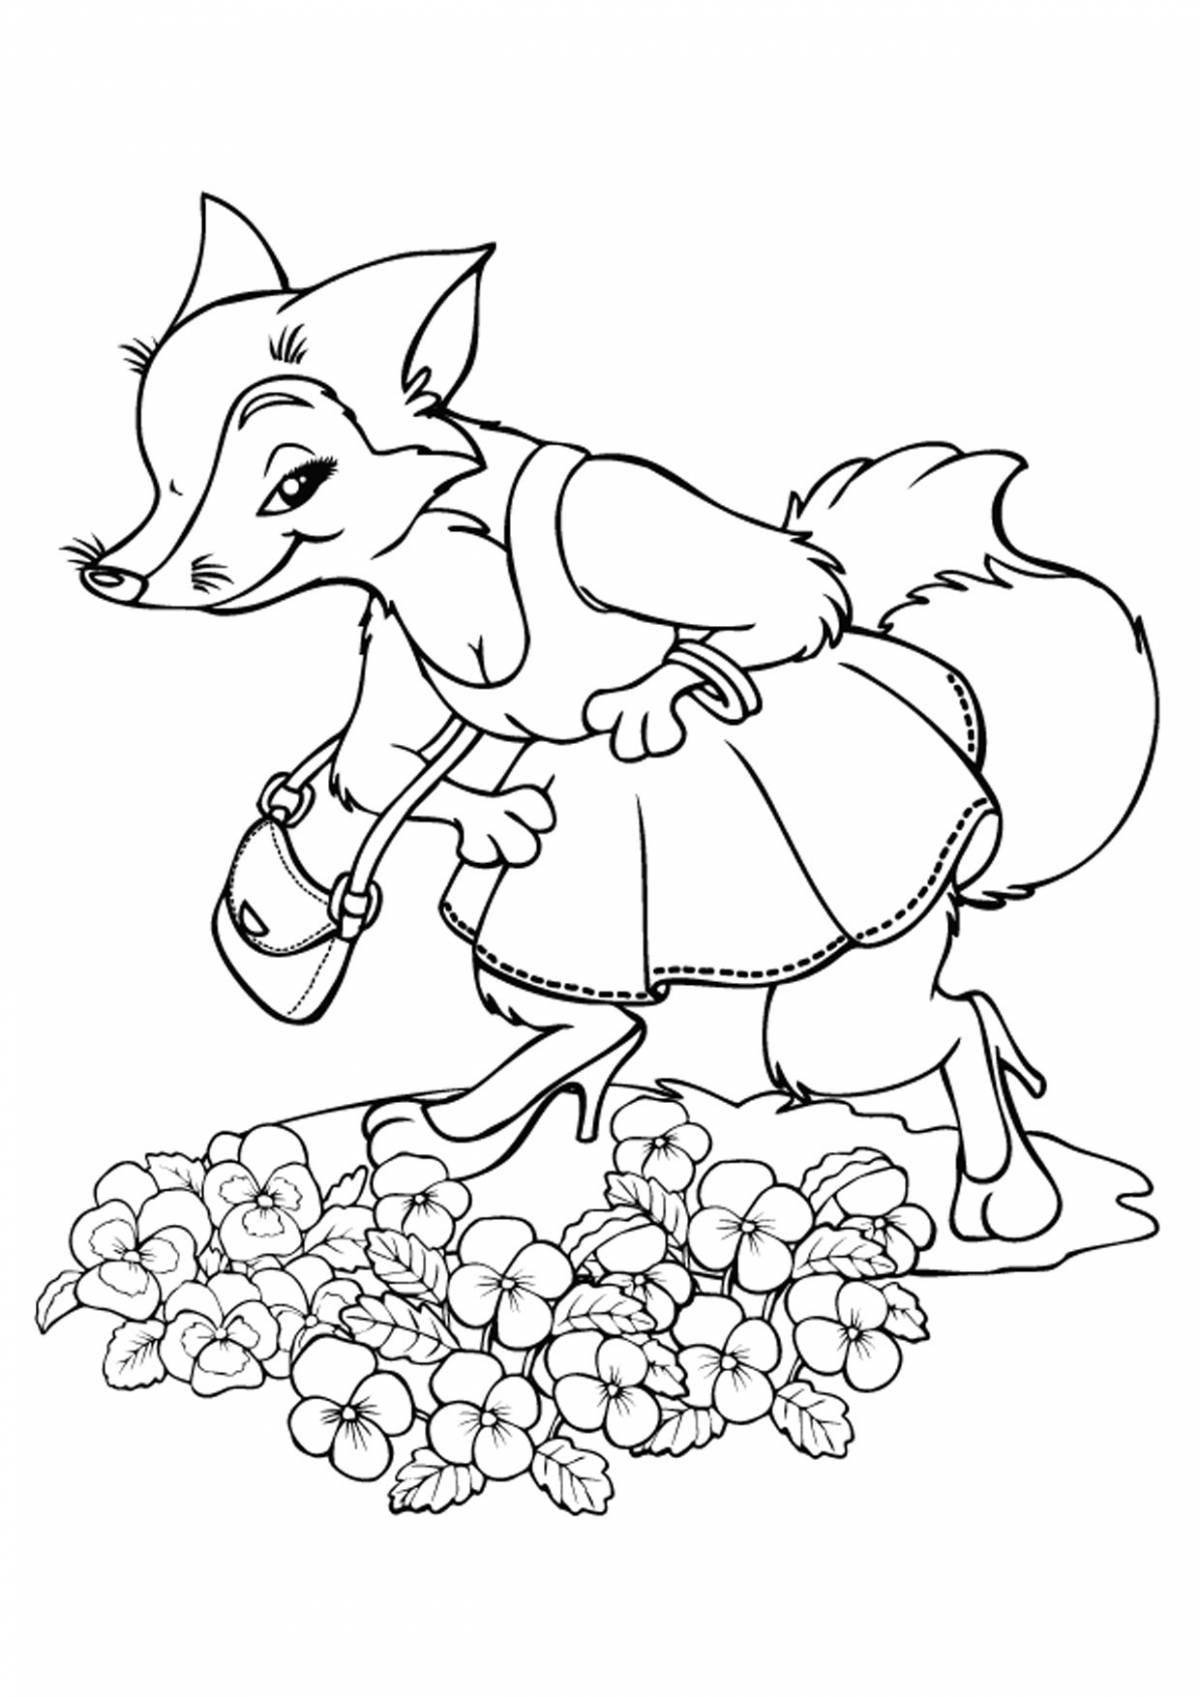 Coloring fox for children 3-4 years old